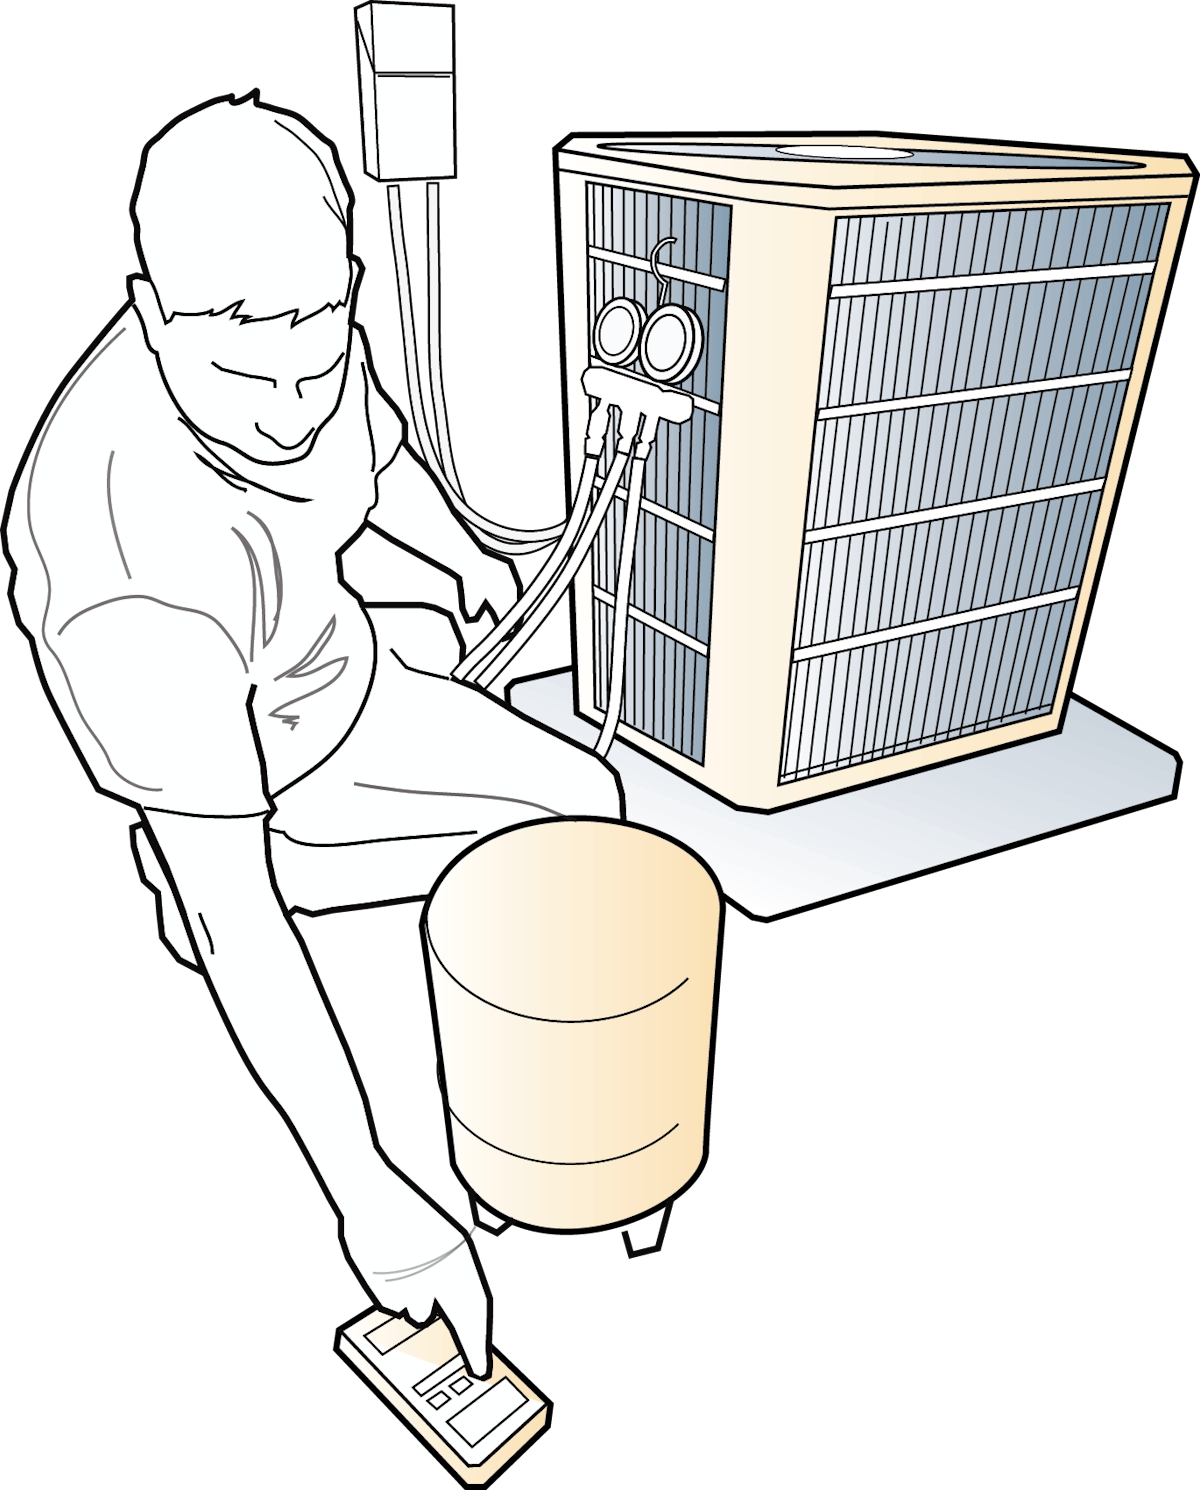 Make sure you have the necessary tools and measurements before randomly adjusting the refrigerant charge. Can you identify the essential test instruments missing from this illustration?